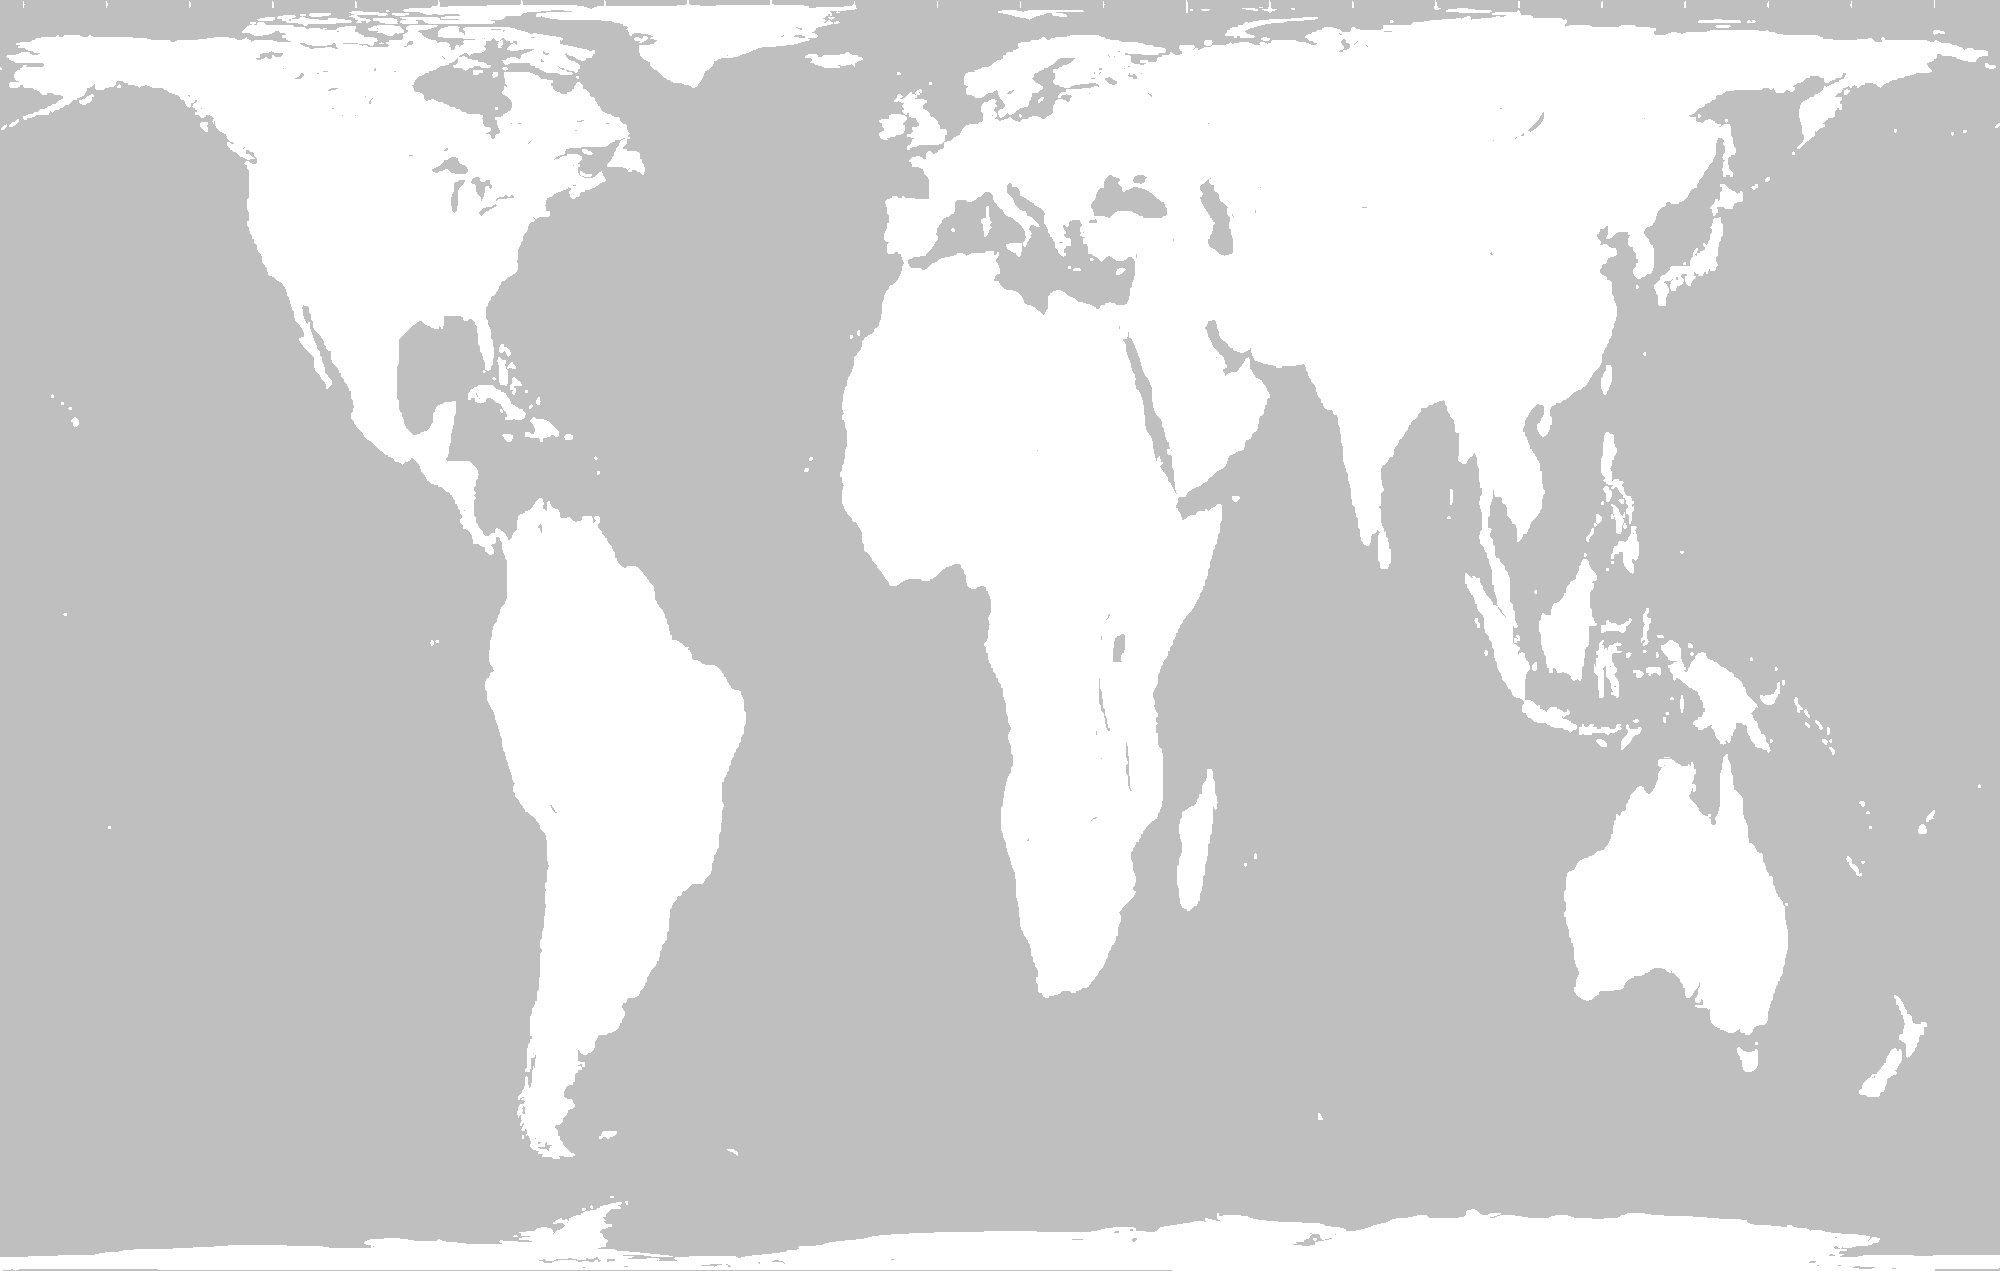 File:Peters projection, black